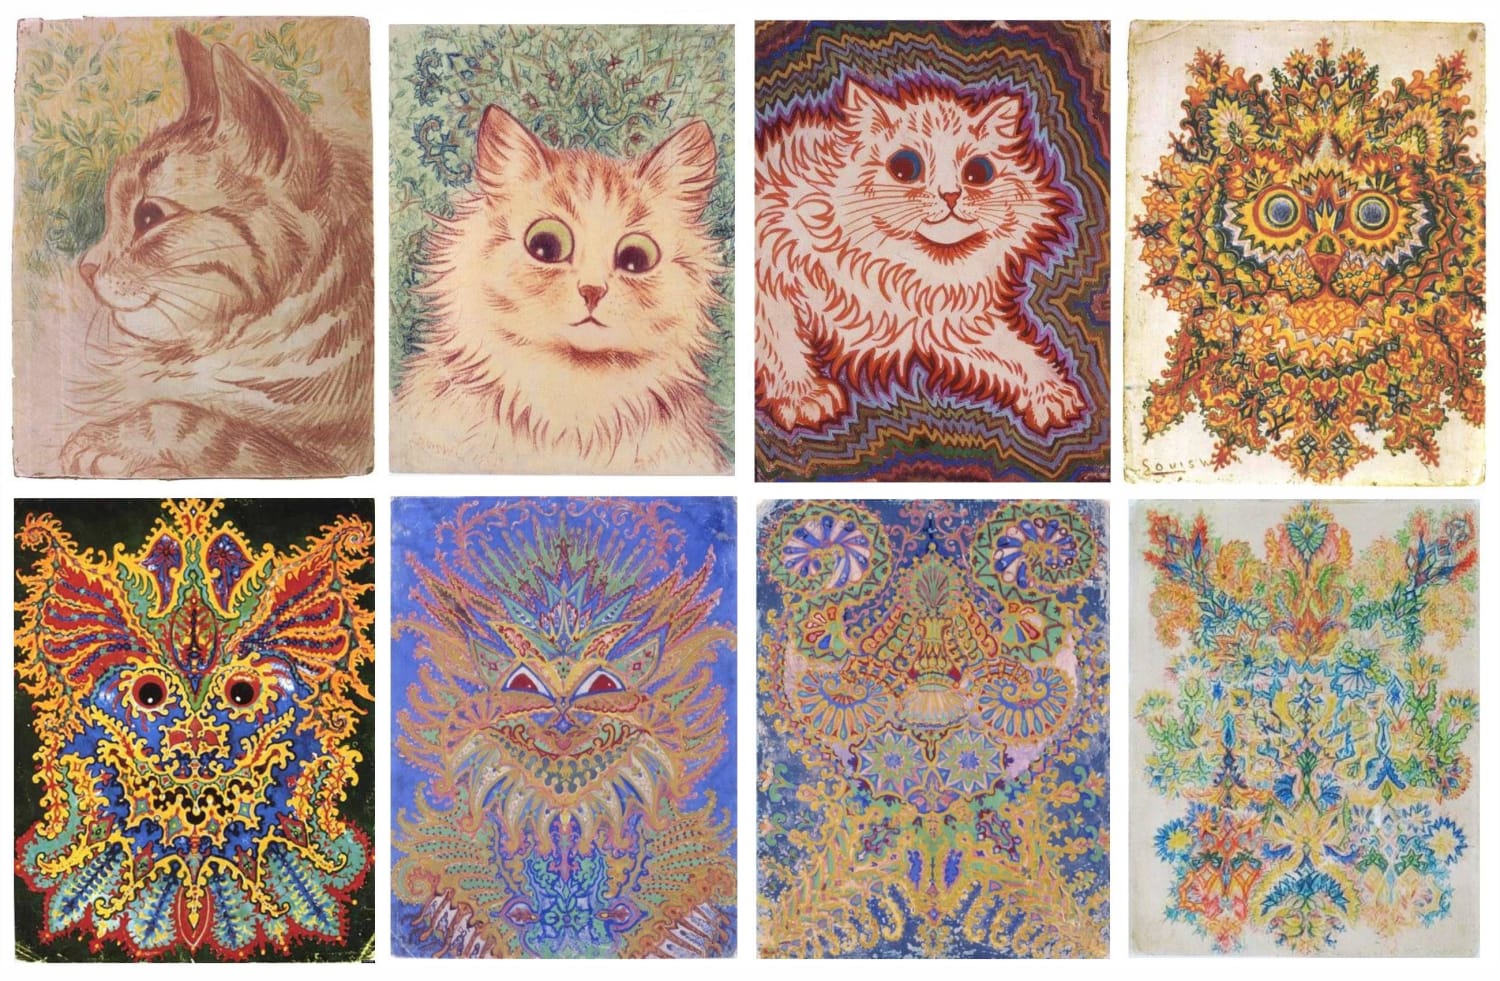 Evolution of artist Louis Wain’s cat drawings as he further spiraled into schizophrenia.